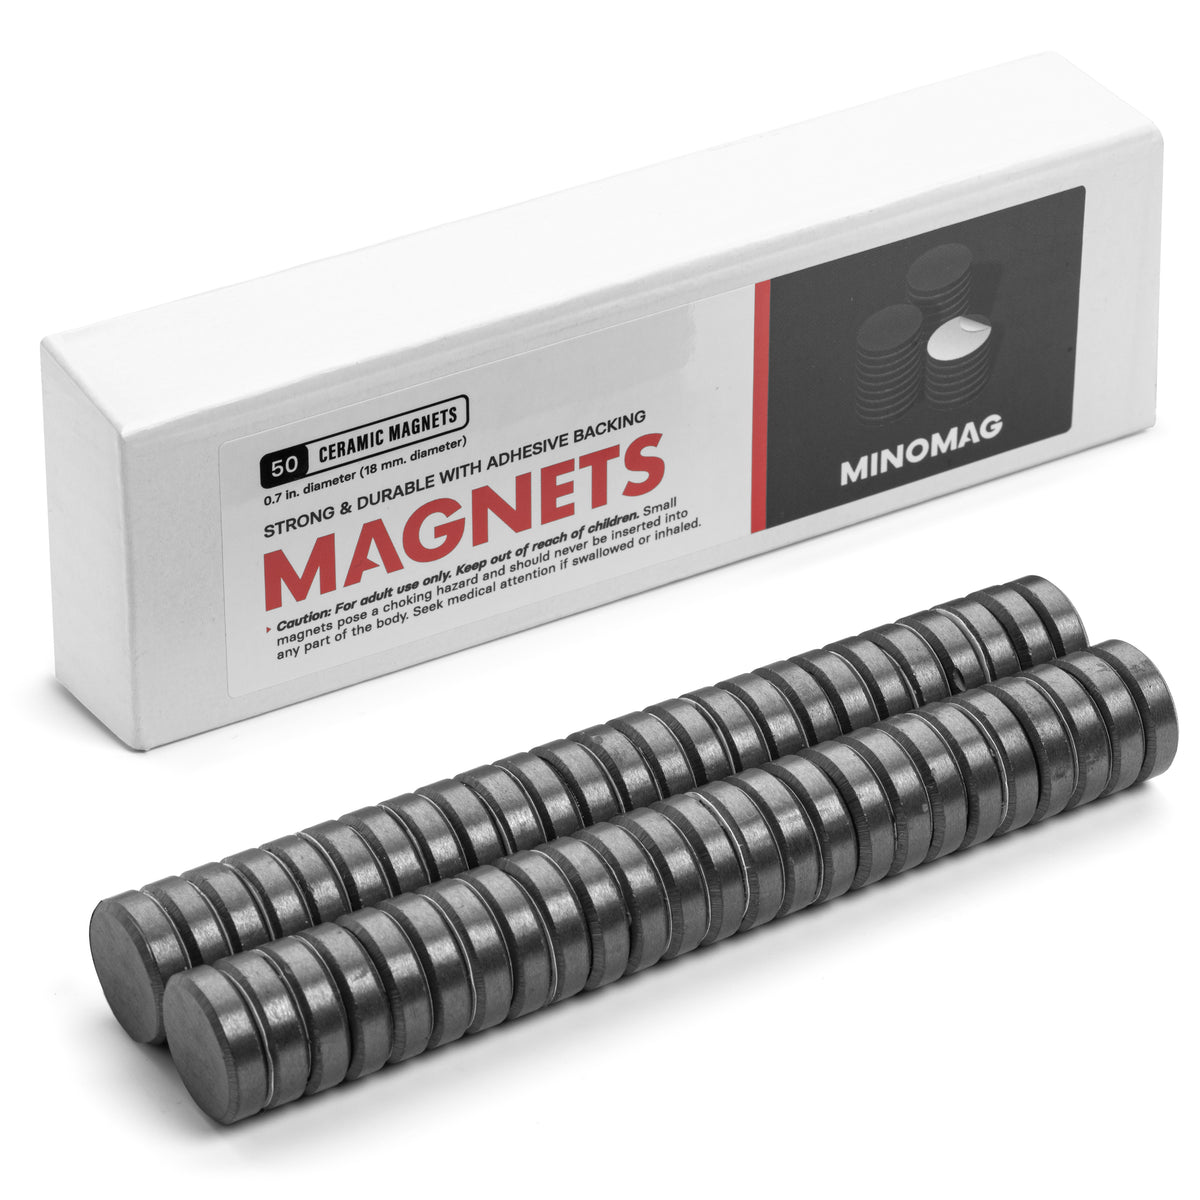 Magnets for Crafts with Adhesive Backing, 11/16 Inch (18Mm) Strong Ceramic  Indus